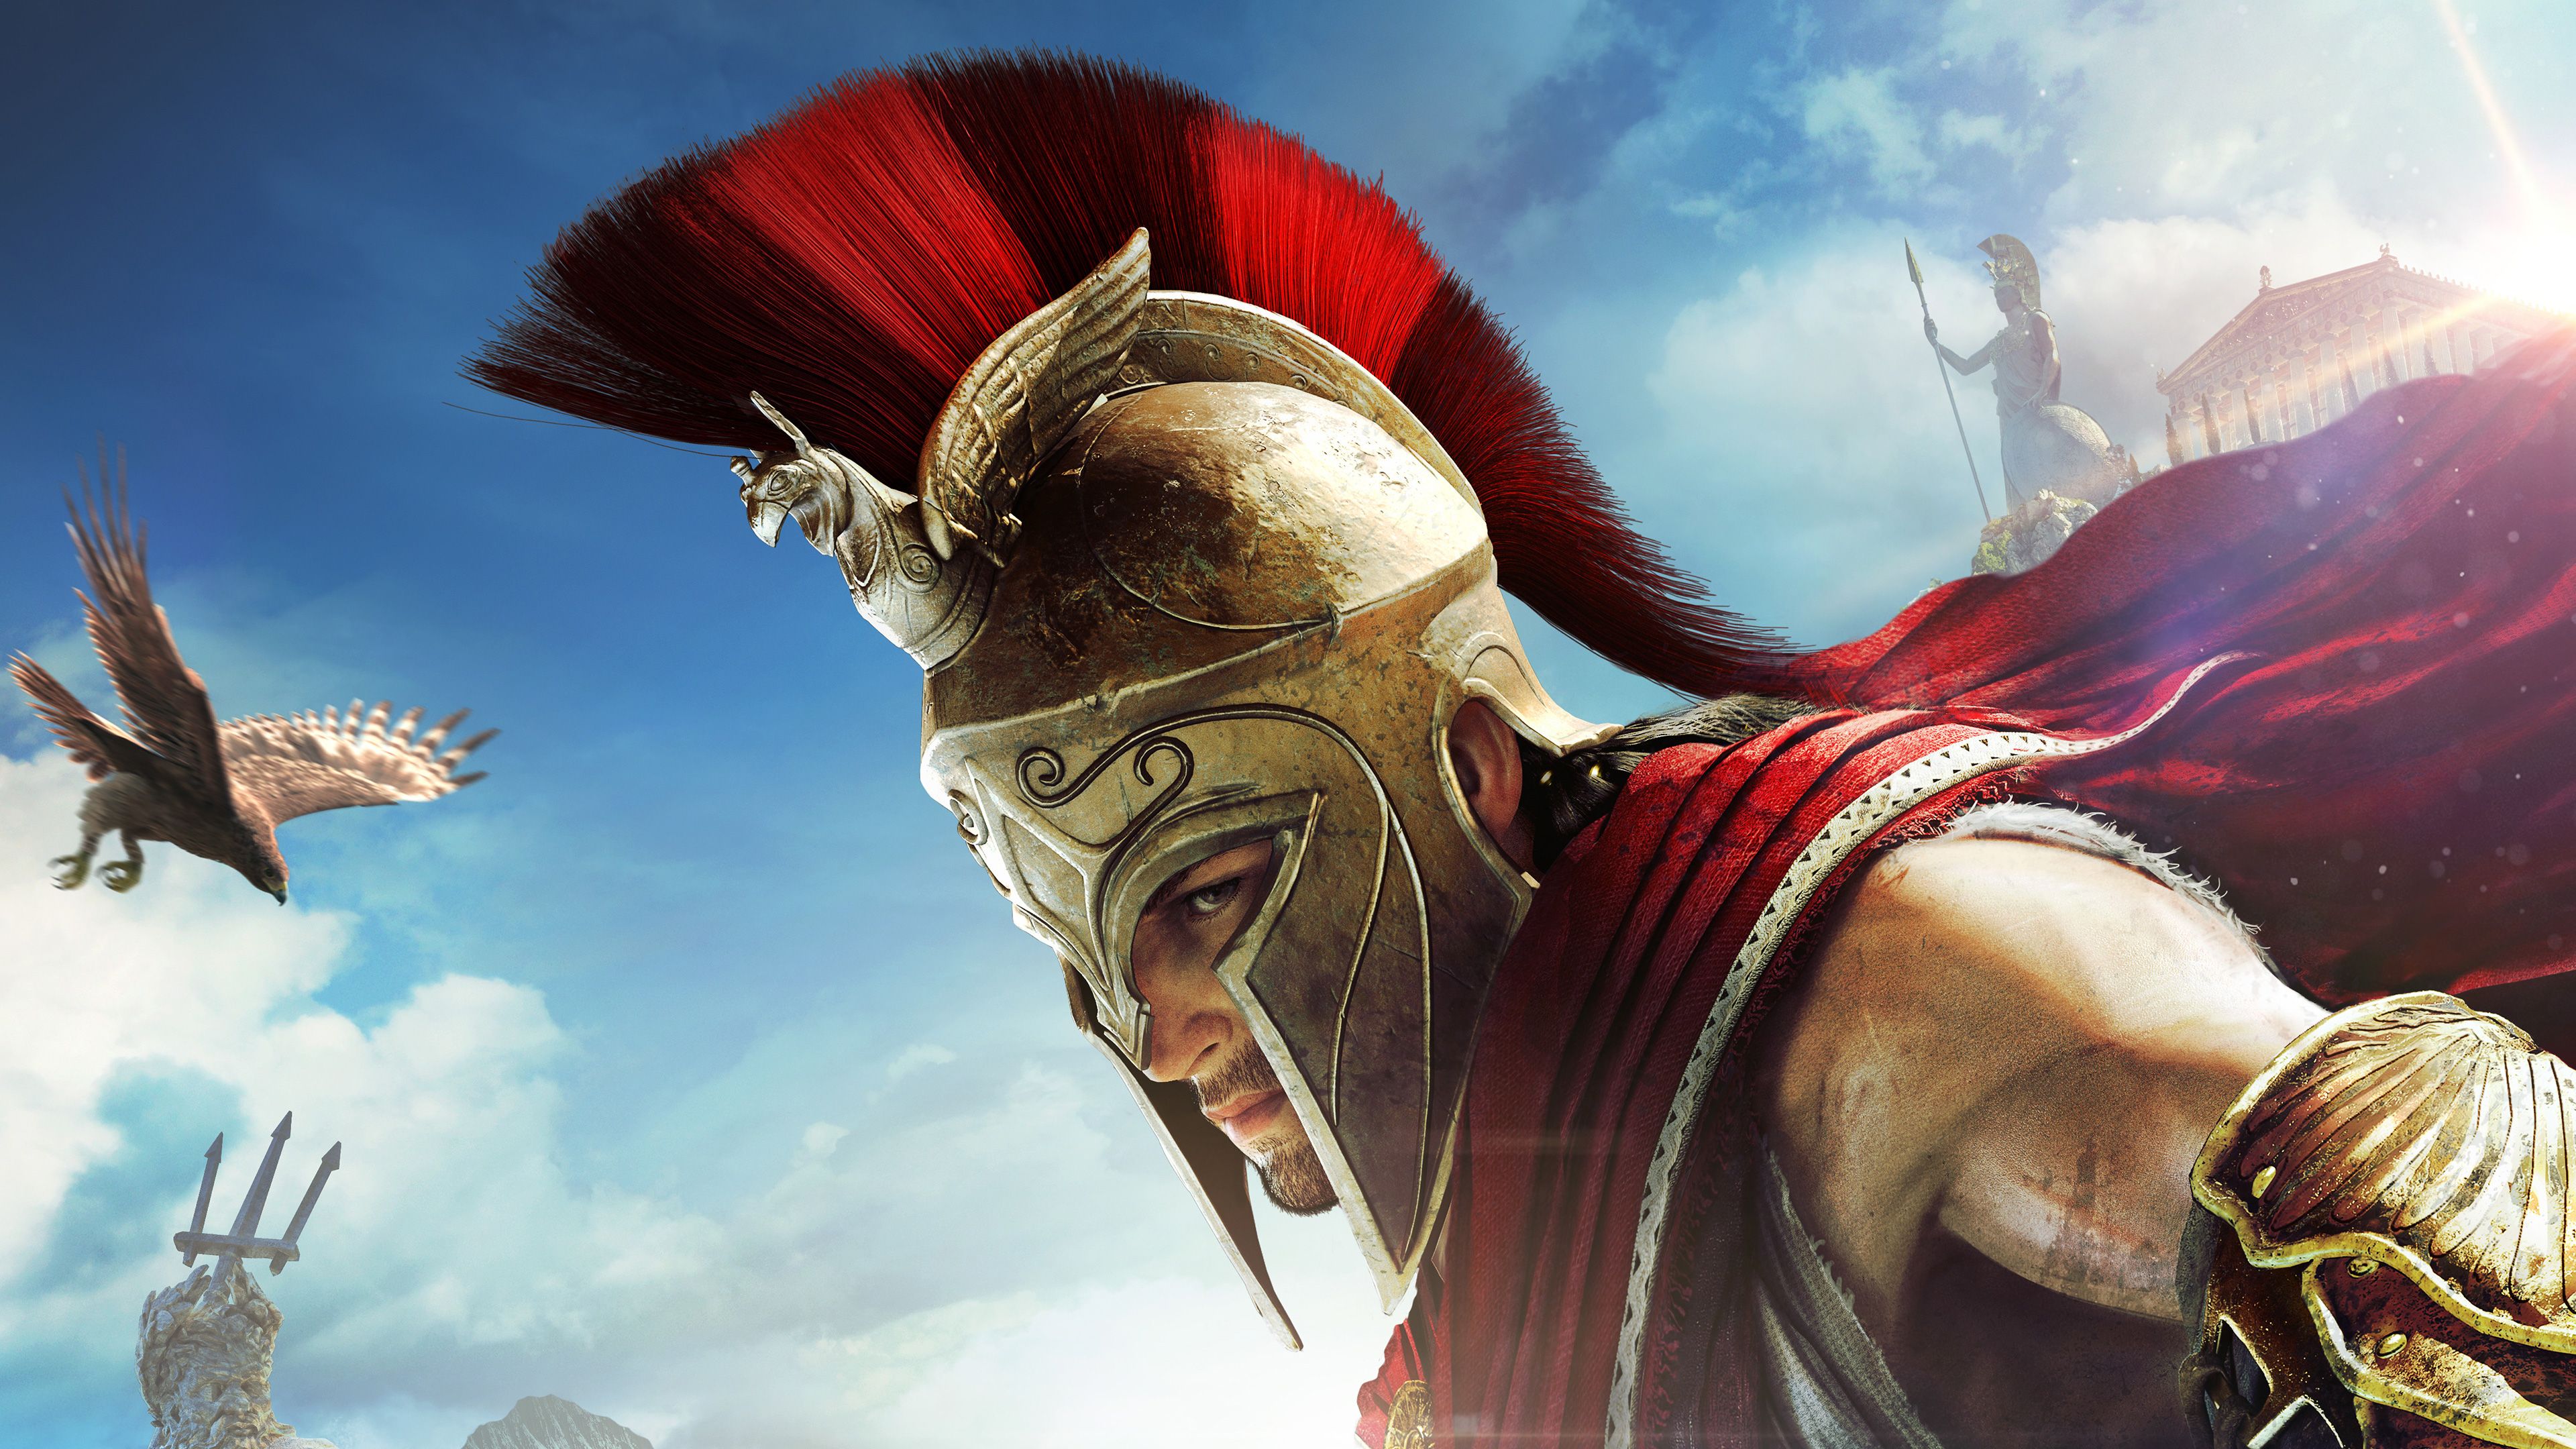 4k Assassins Creed Odyssey, HD Games, 4k Wallpapers, Image